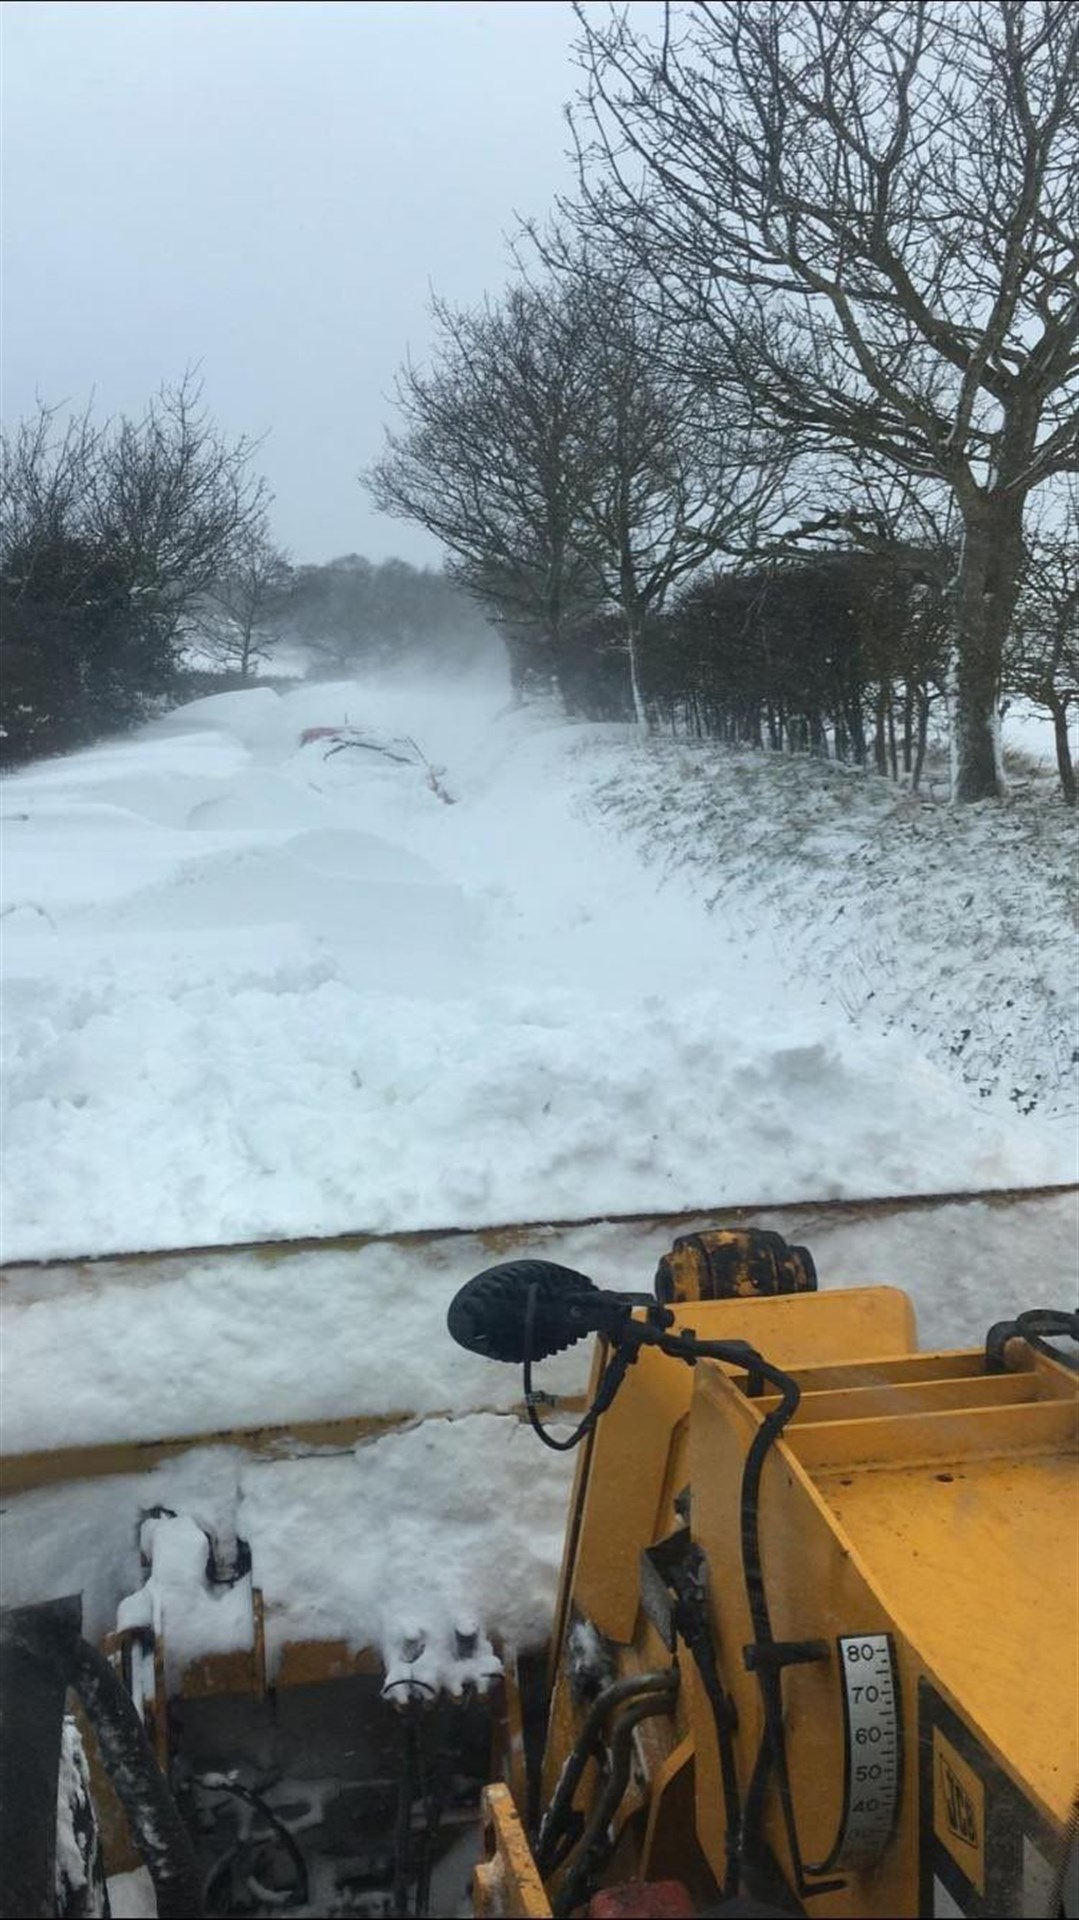 One driver got caught in a snowdrift in Norfolk and had to be dug from his car (Steve Lawrence)